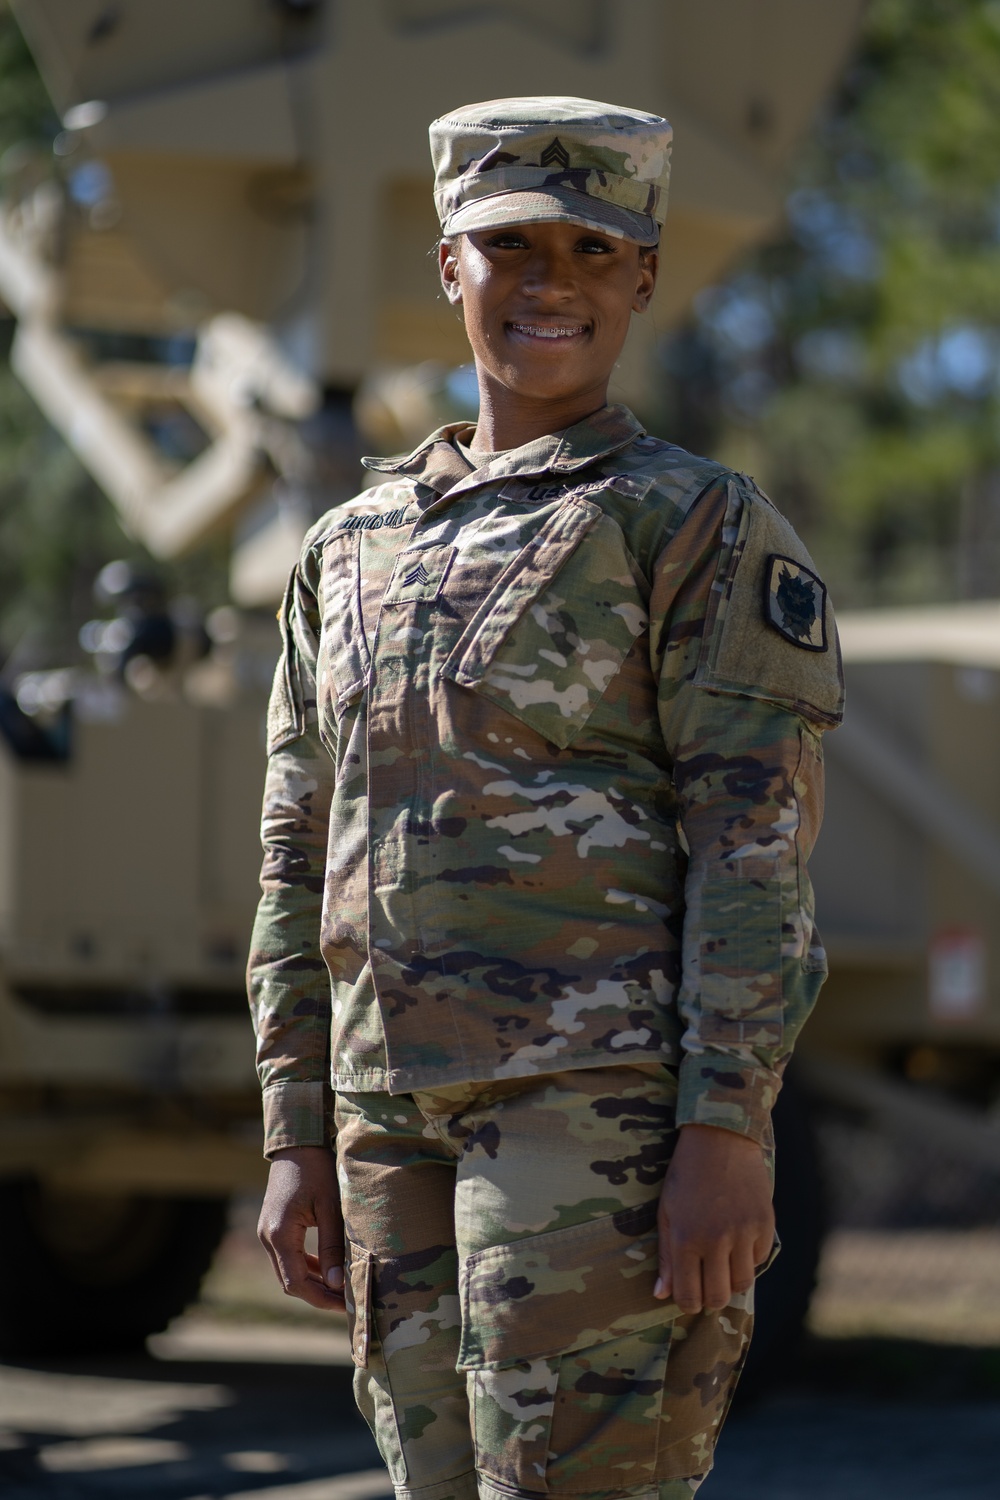 Army Sergeant Earns Ph.D While Serving on Active Duty